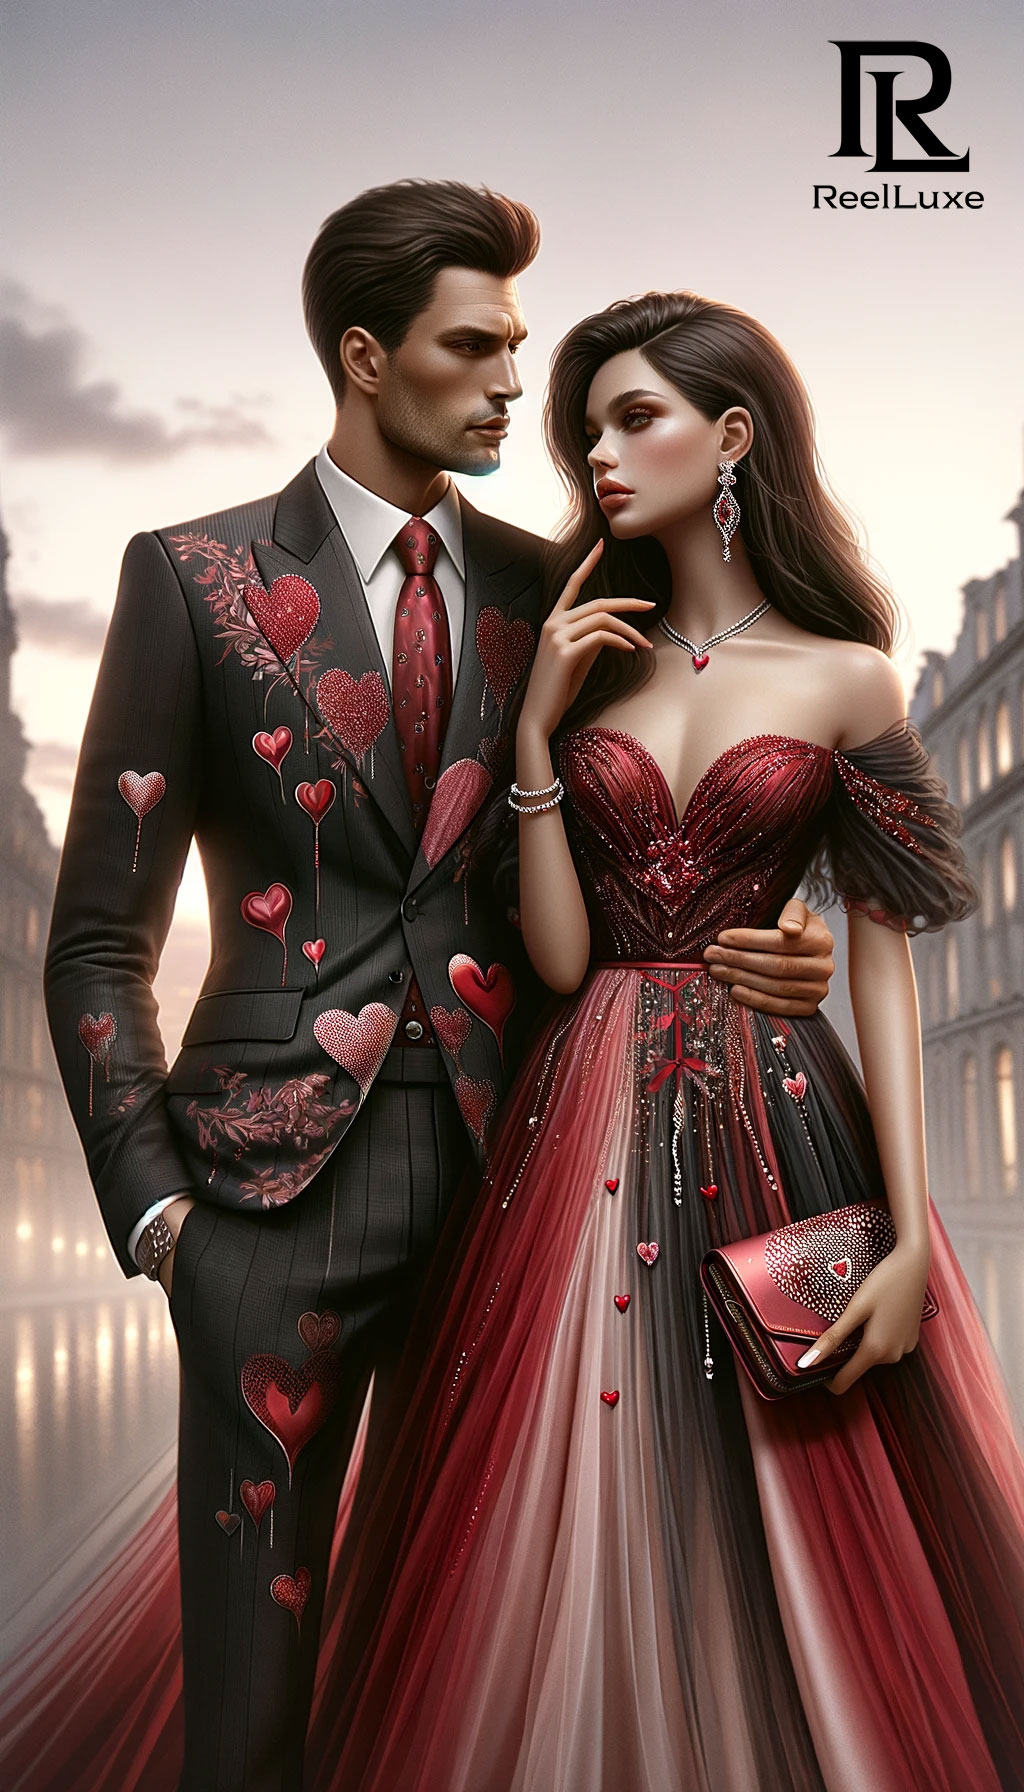 Romance in the Air – Valentine’s Day – Beauty and Fashion – 6